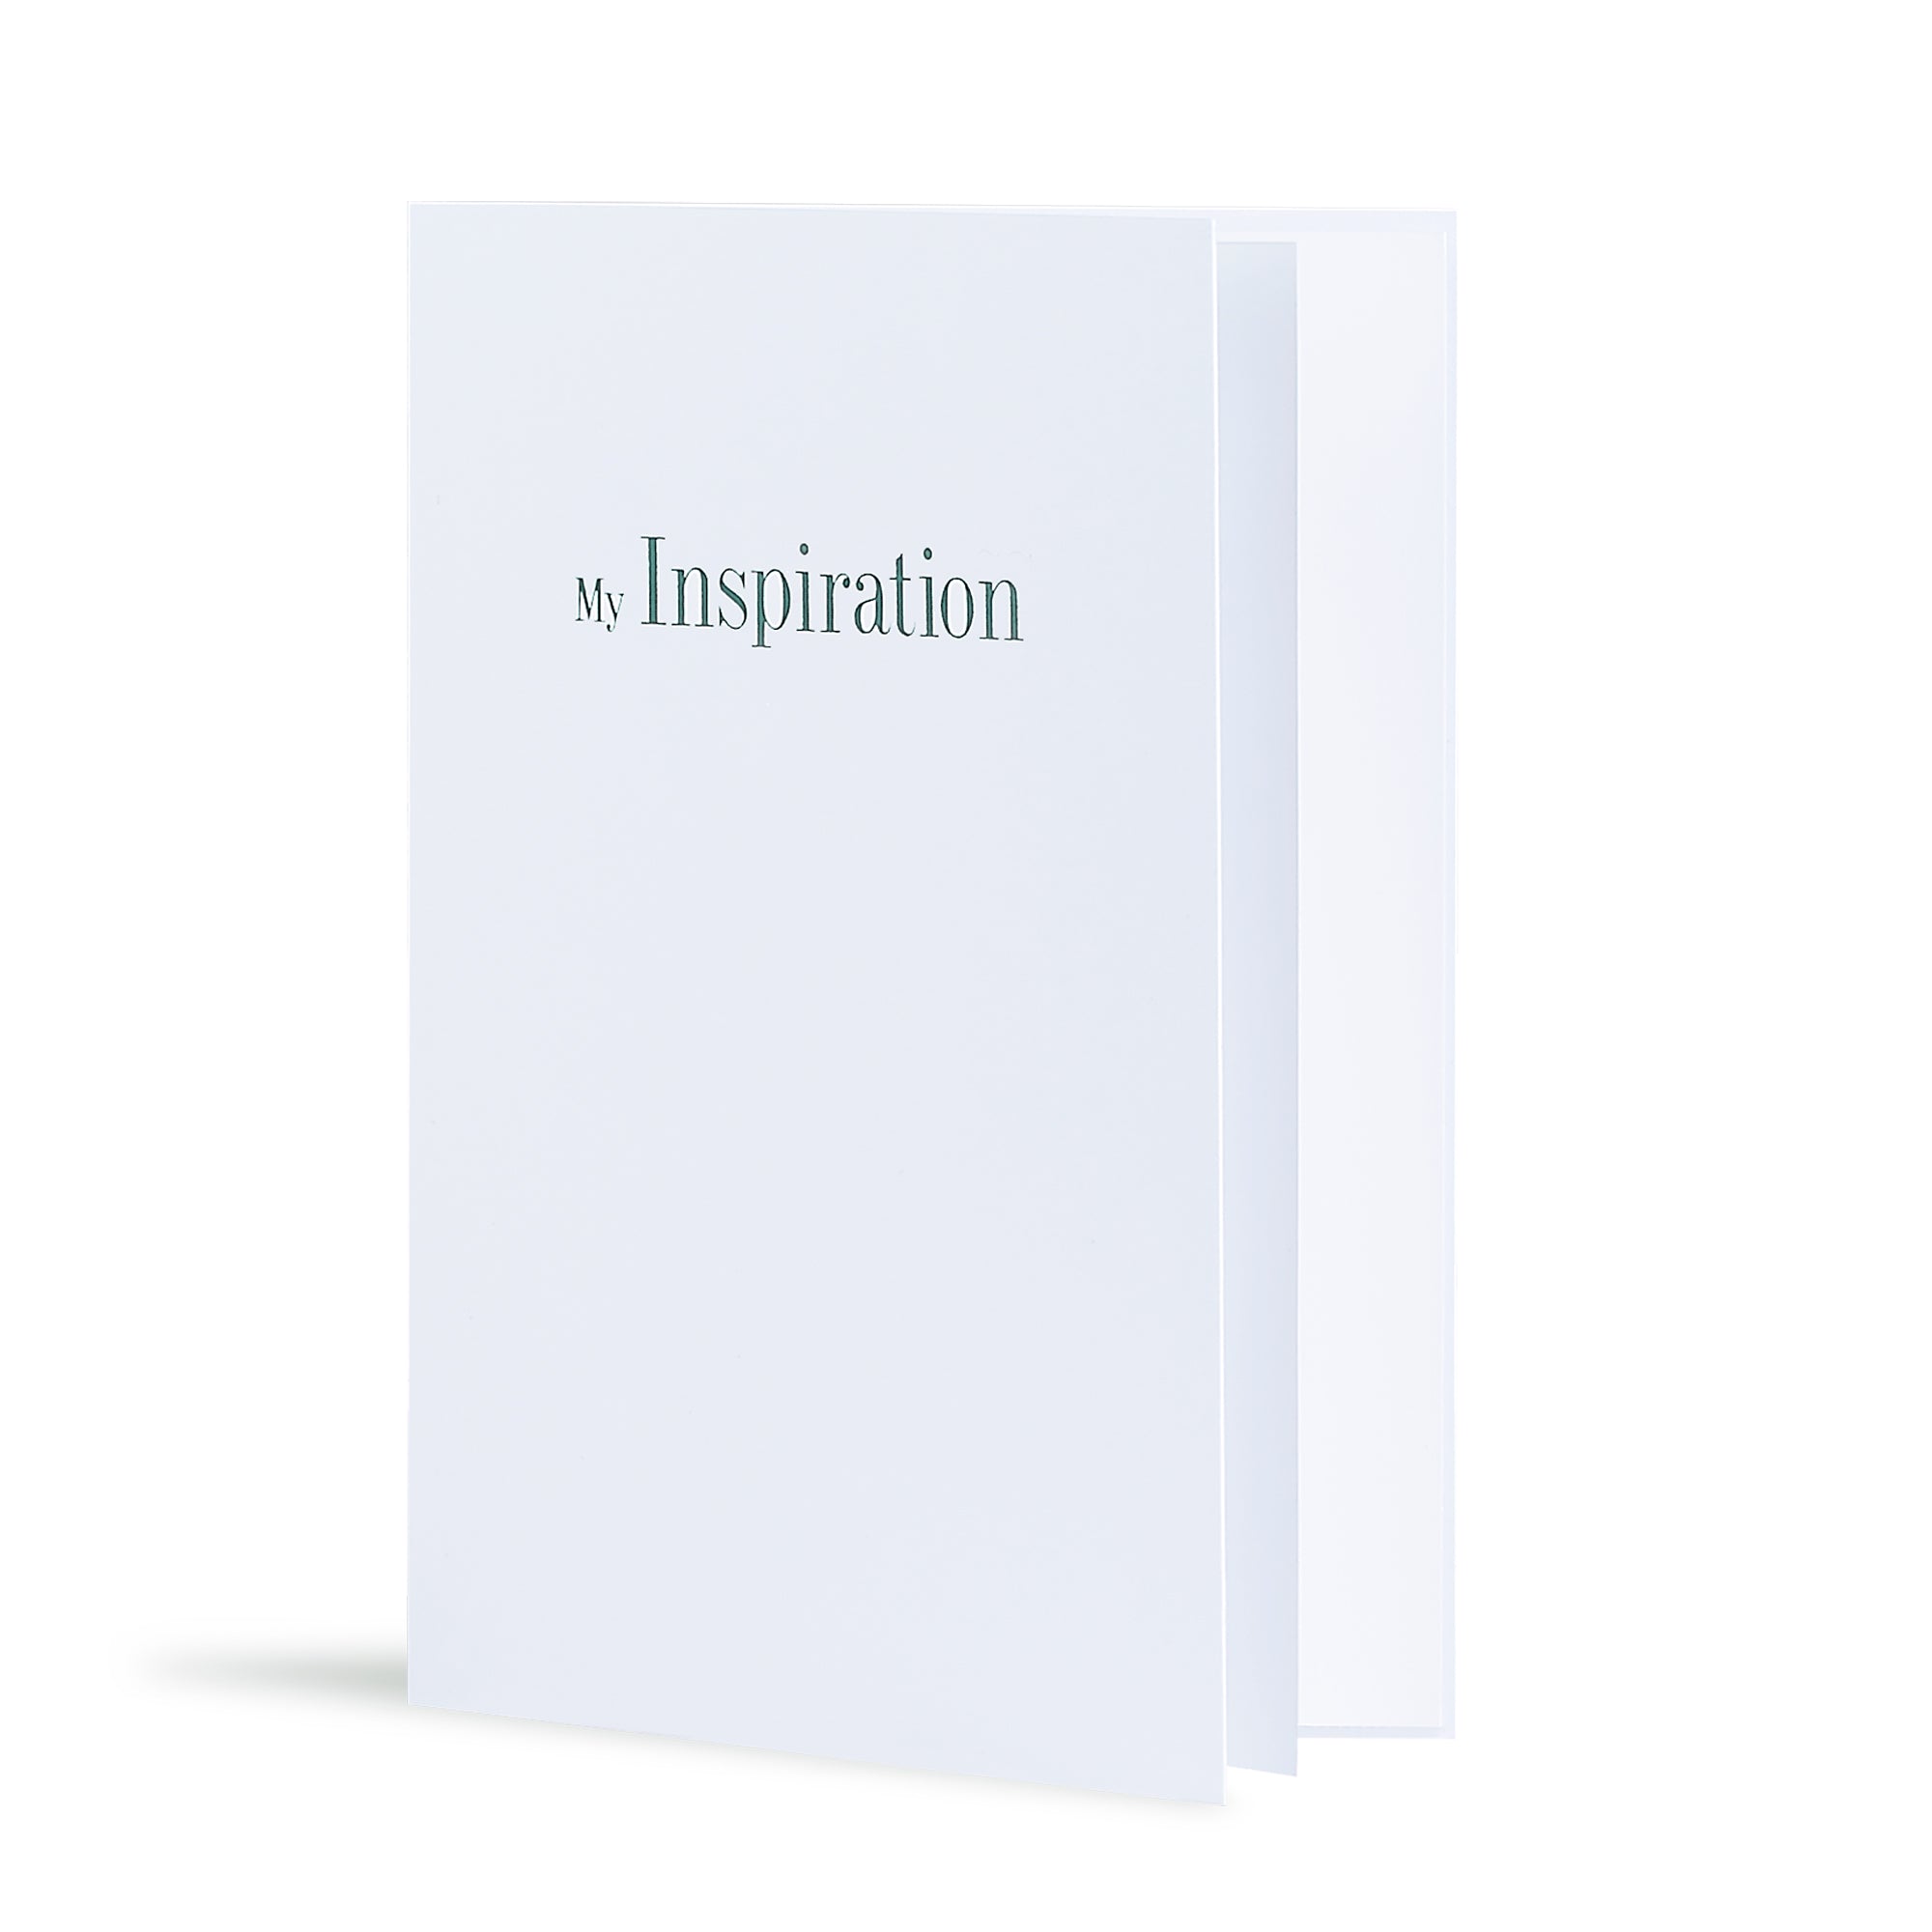 My Inspiration Greeting Card in White, Side